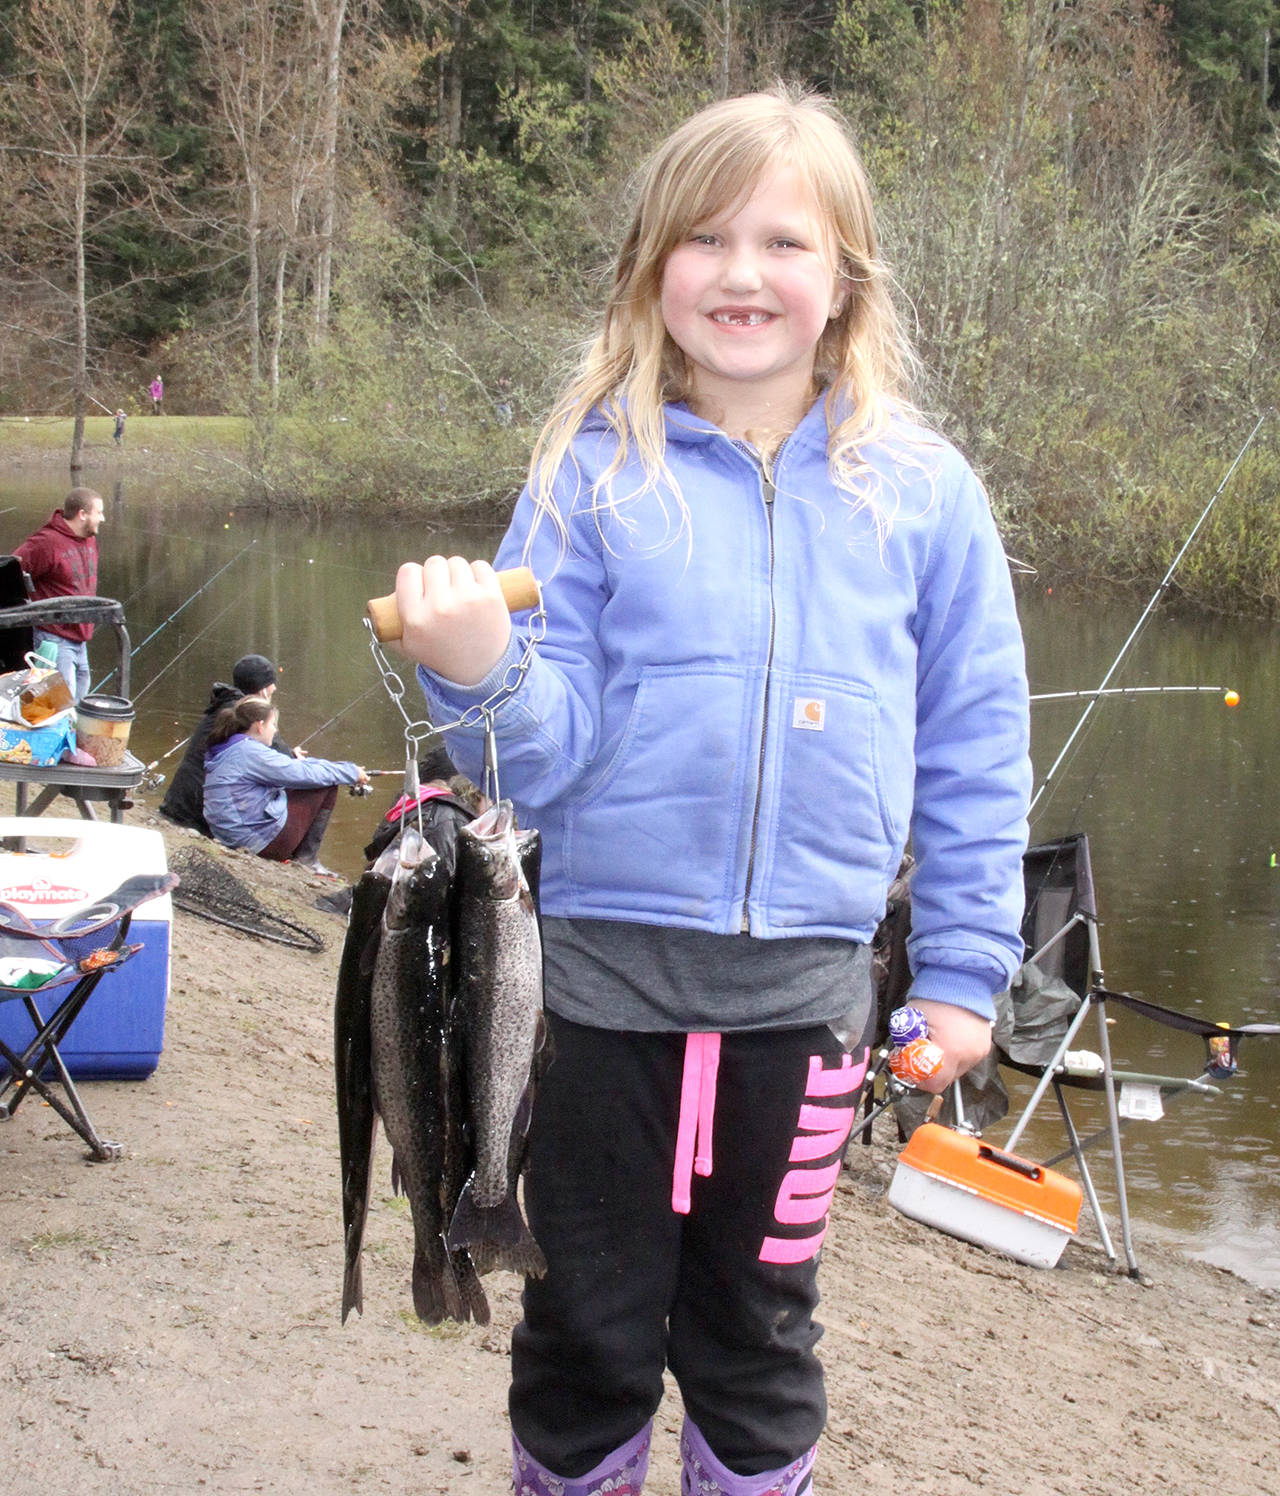 Dave Logan/for Peninsula Daily News                                Mackenzie Lobbe, age 6 of Port Angeles, holds five rainbow trout she and members of her family caught at the Port Angeles Kids Fishing Derby Saturday at Lincoln Park. Chloe Bitze, 8, caught the largest fish of the day, a 22-inch rainbow. The annual event was put on by Olympic Peninsula Fly Fishers, Port Angeles Kiwanis, the state Department of Fish and Wildlife and city of Port Angeles Parks and Recreation.